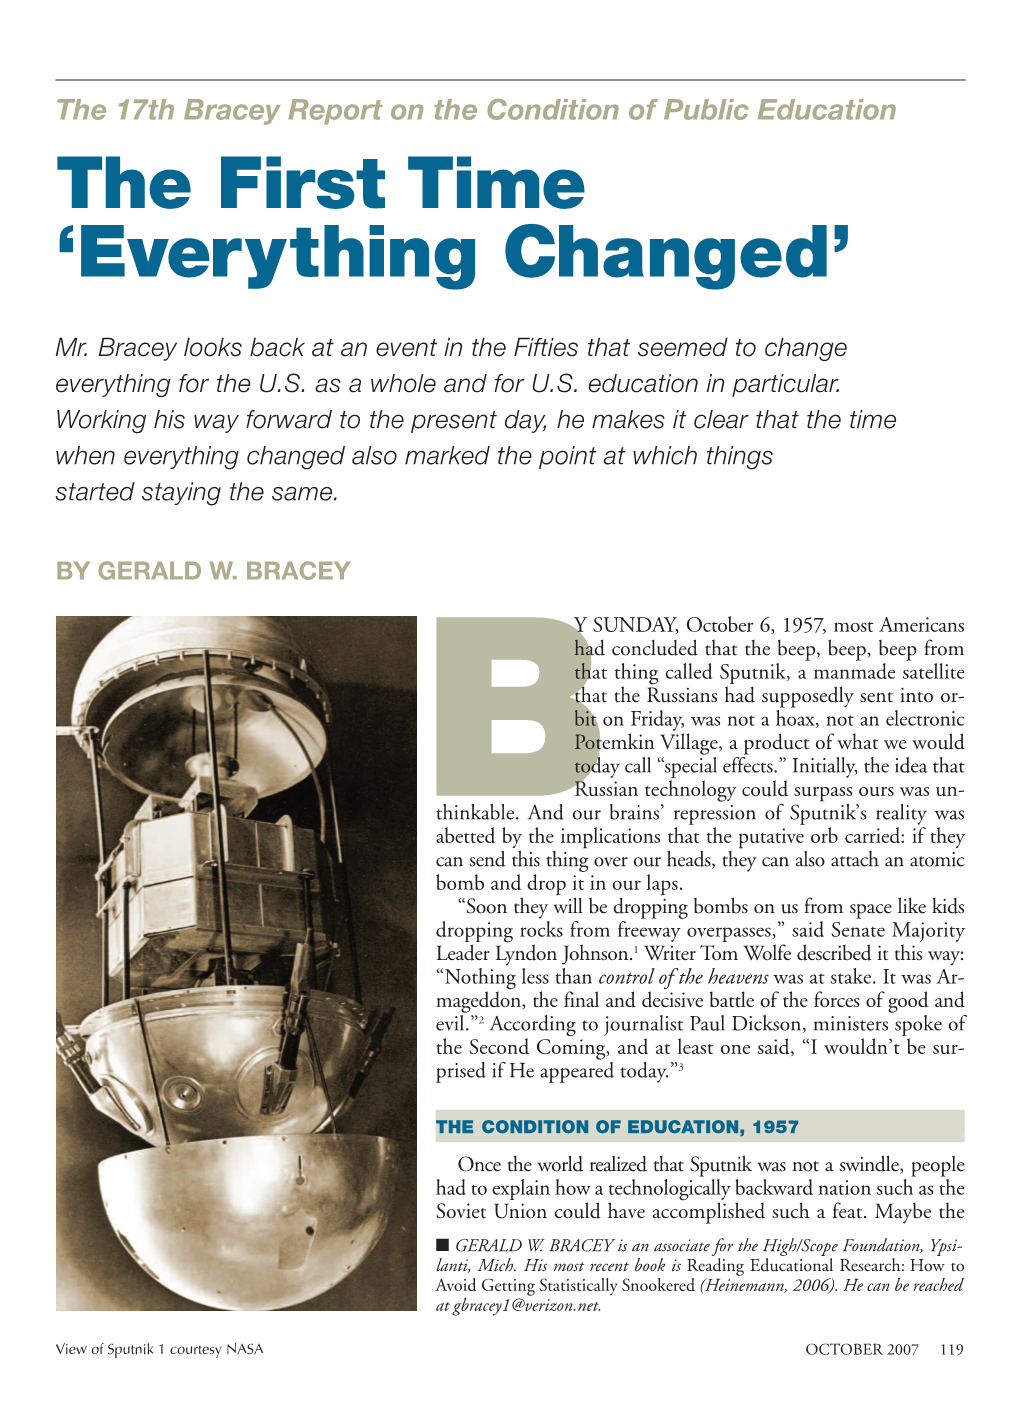 The First Time 'Everything Changed': the 17Th Bracey Report on the Condition of Public Education, Vol